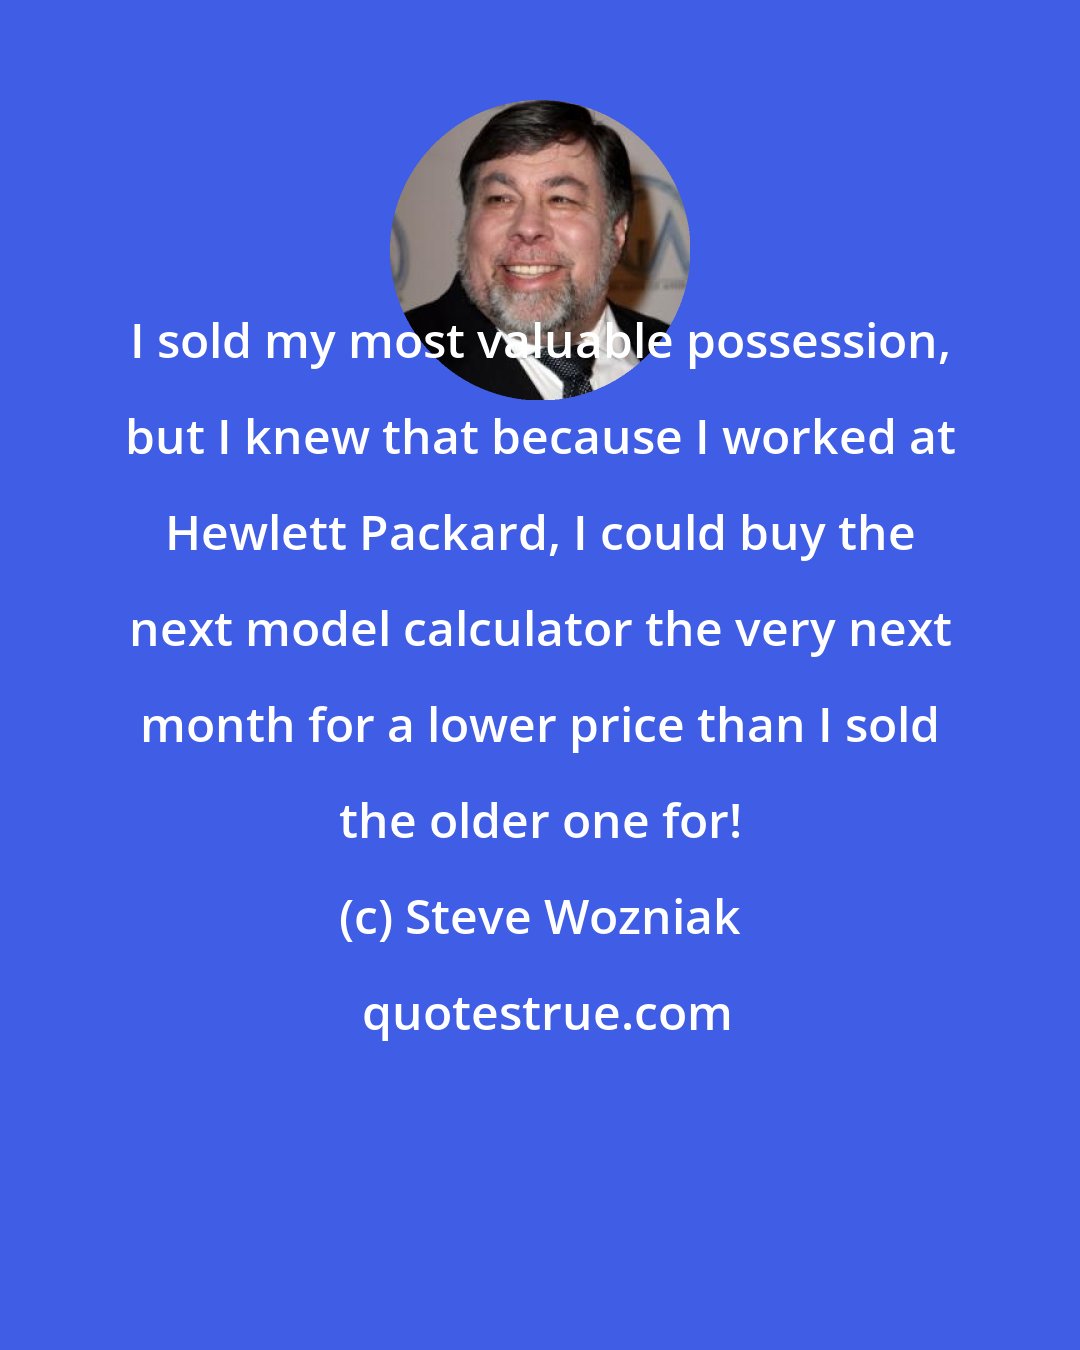 Steve Wozniak: I sold my most valuable possession, but I knew that because I worked at Hewlett Packard, I could buy the next model calculator the very next month for a lower price than I sold the older one for!